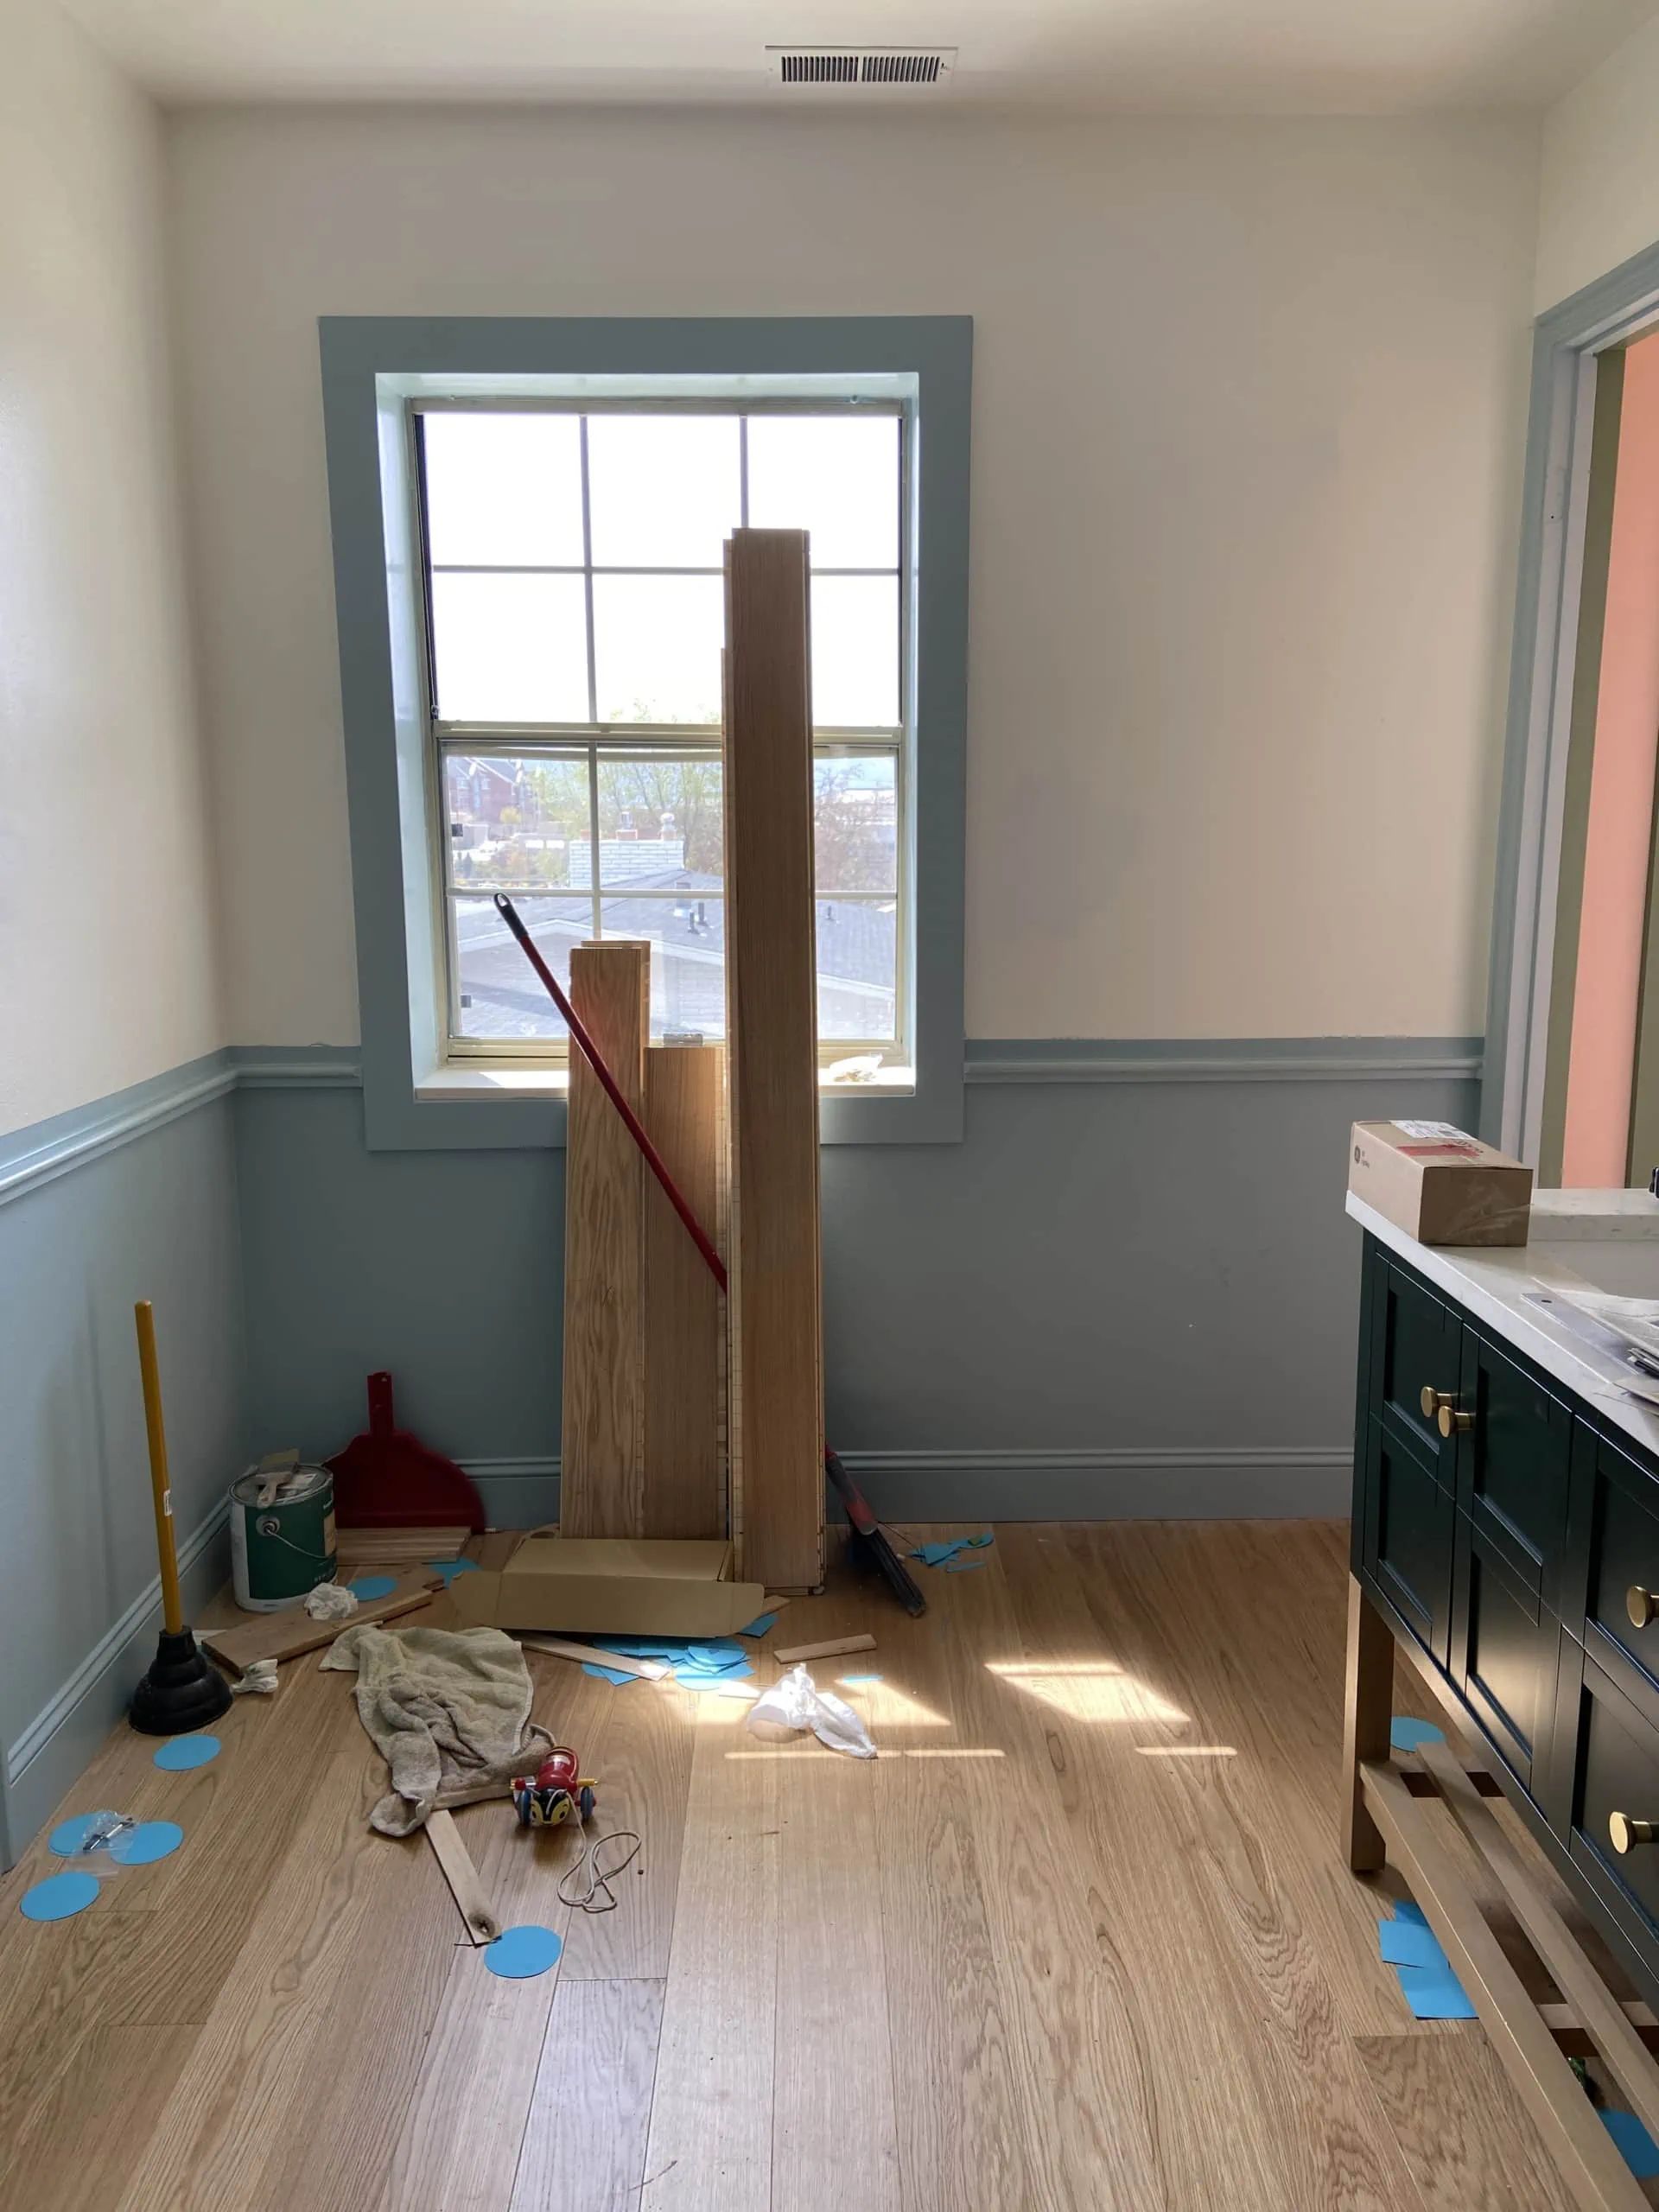 Interior shot of a bathroom with wooden floors and blue and white walls. There's blue-painted trim at waist-height around the room, and some boards and materials are cluttered in the corner and under a window.